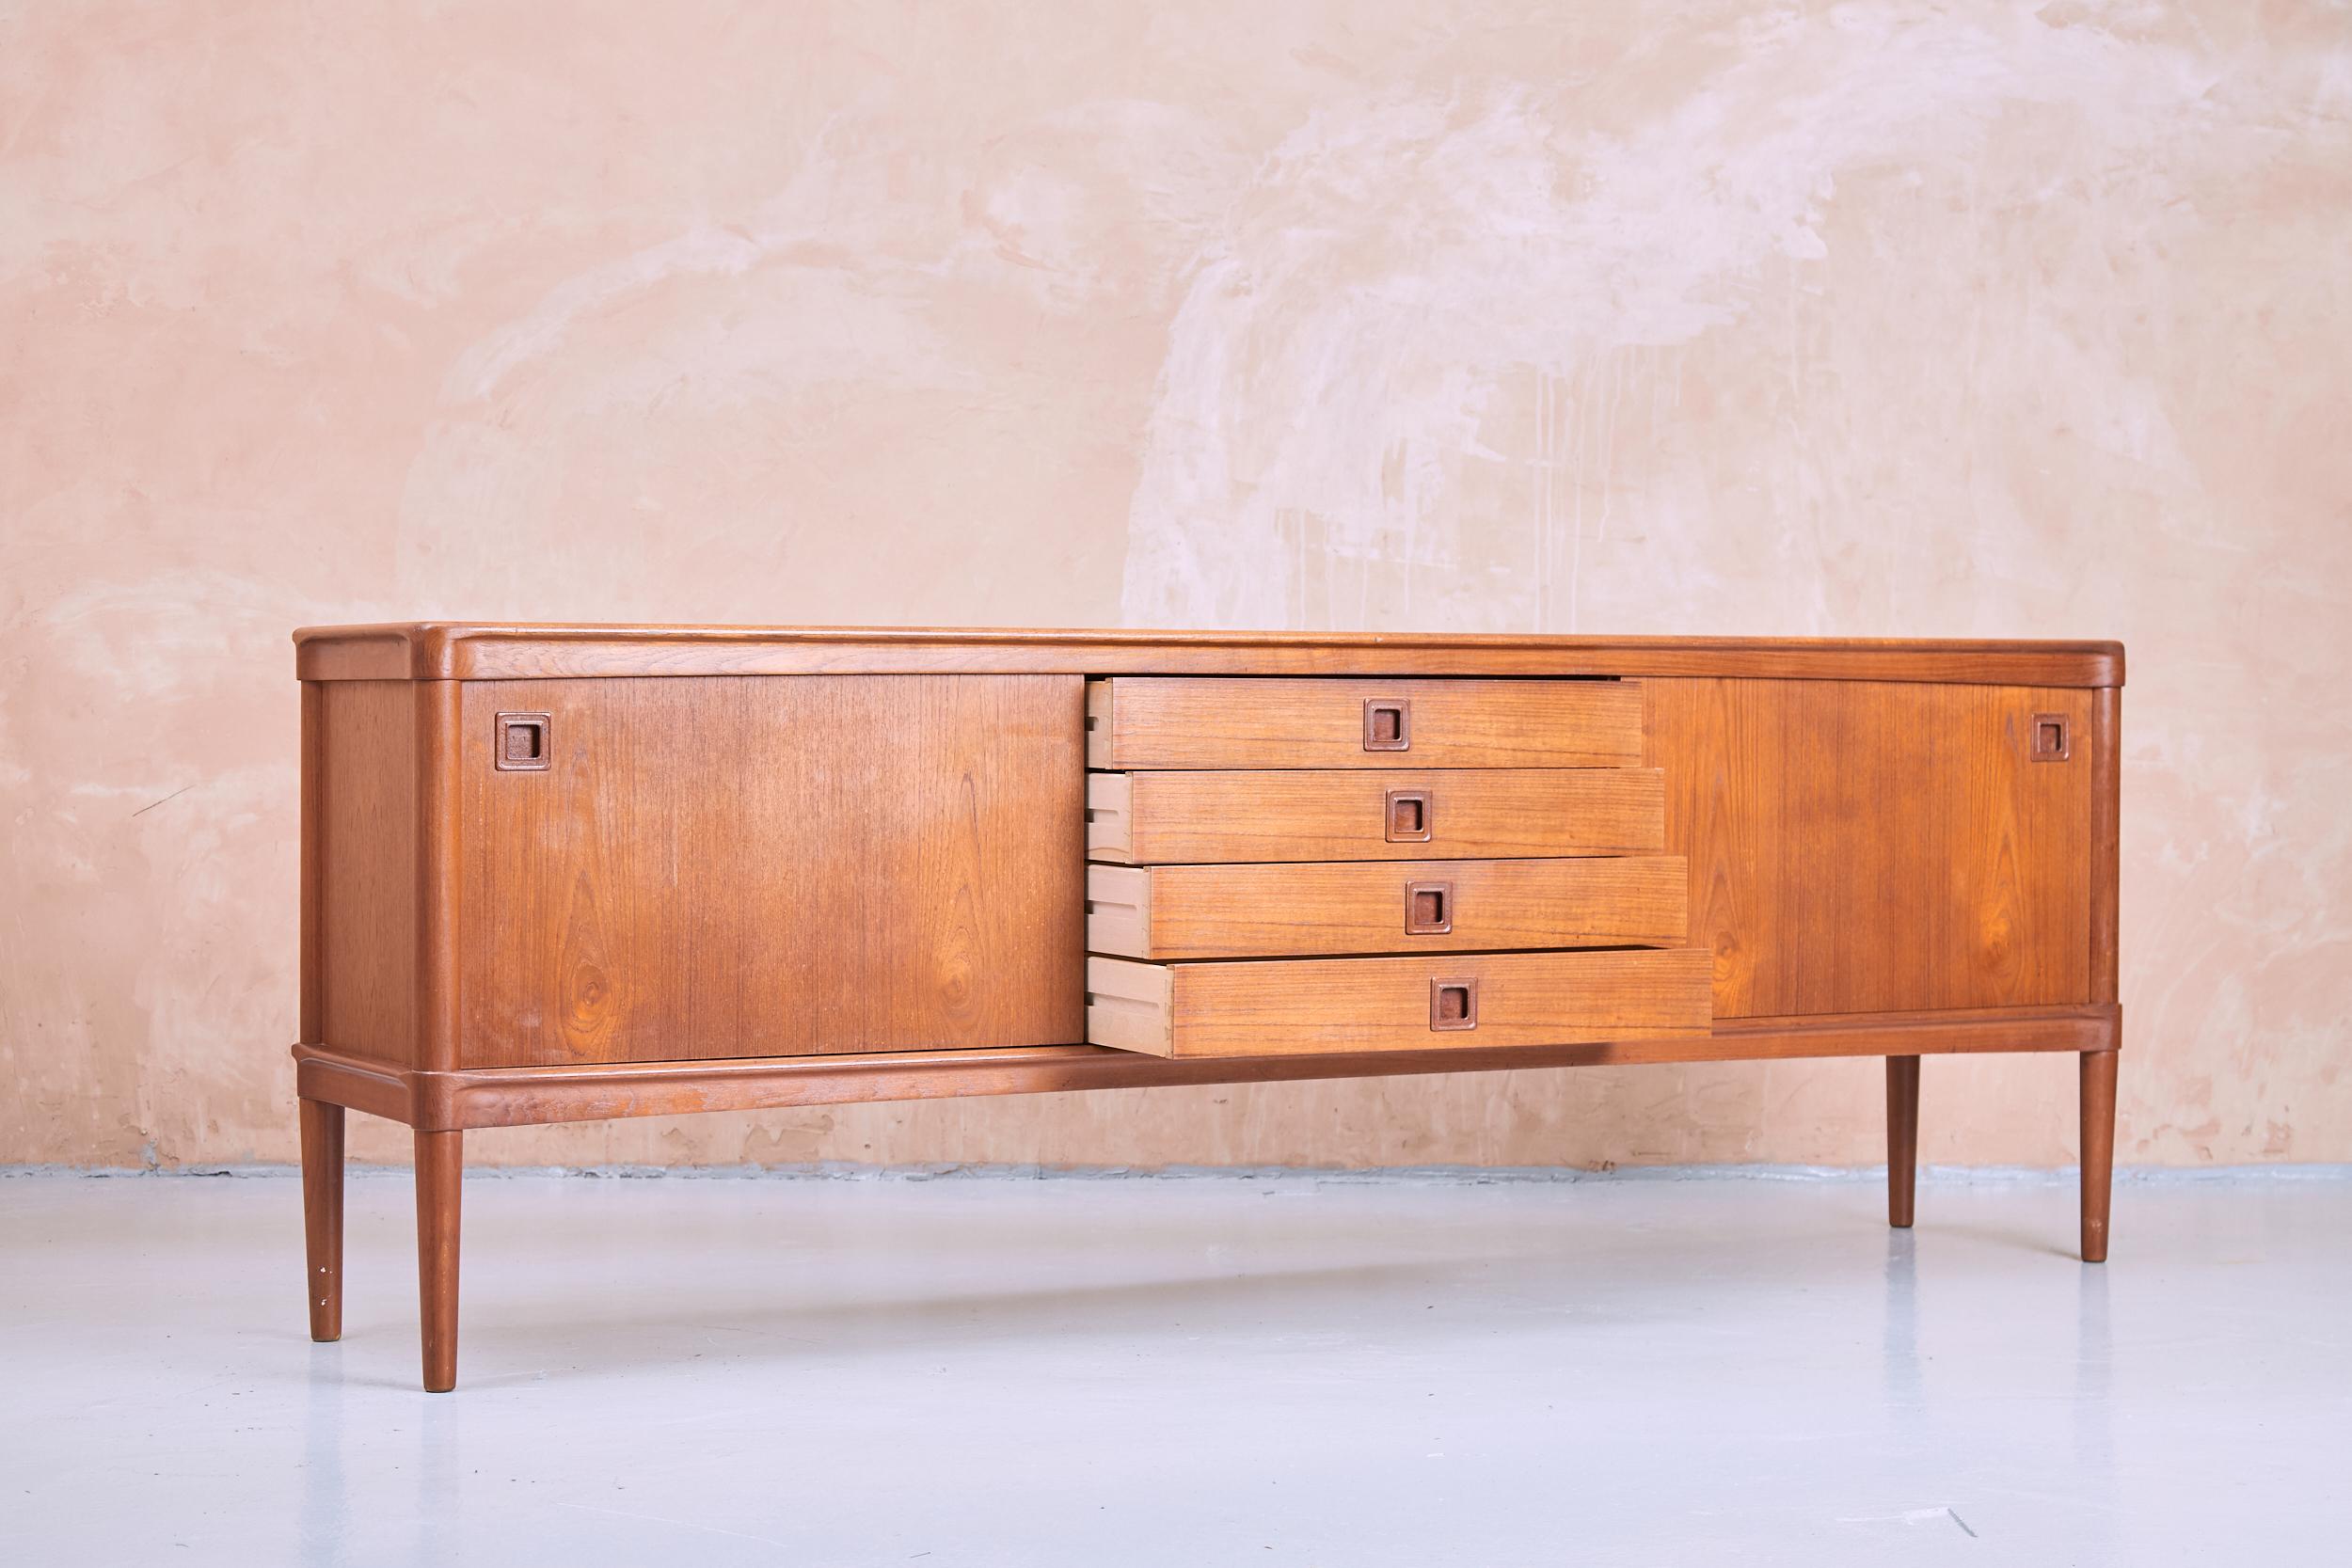 A Danish sideboard designed by Henry W.Klein and produced by Bramin in the 1960s. Crafted in teak, this statement piece features four centre drawers and two large sliding cupboard doors. All doors and drawers feature the designer’s signature carved